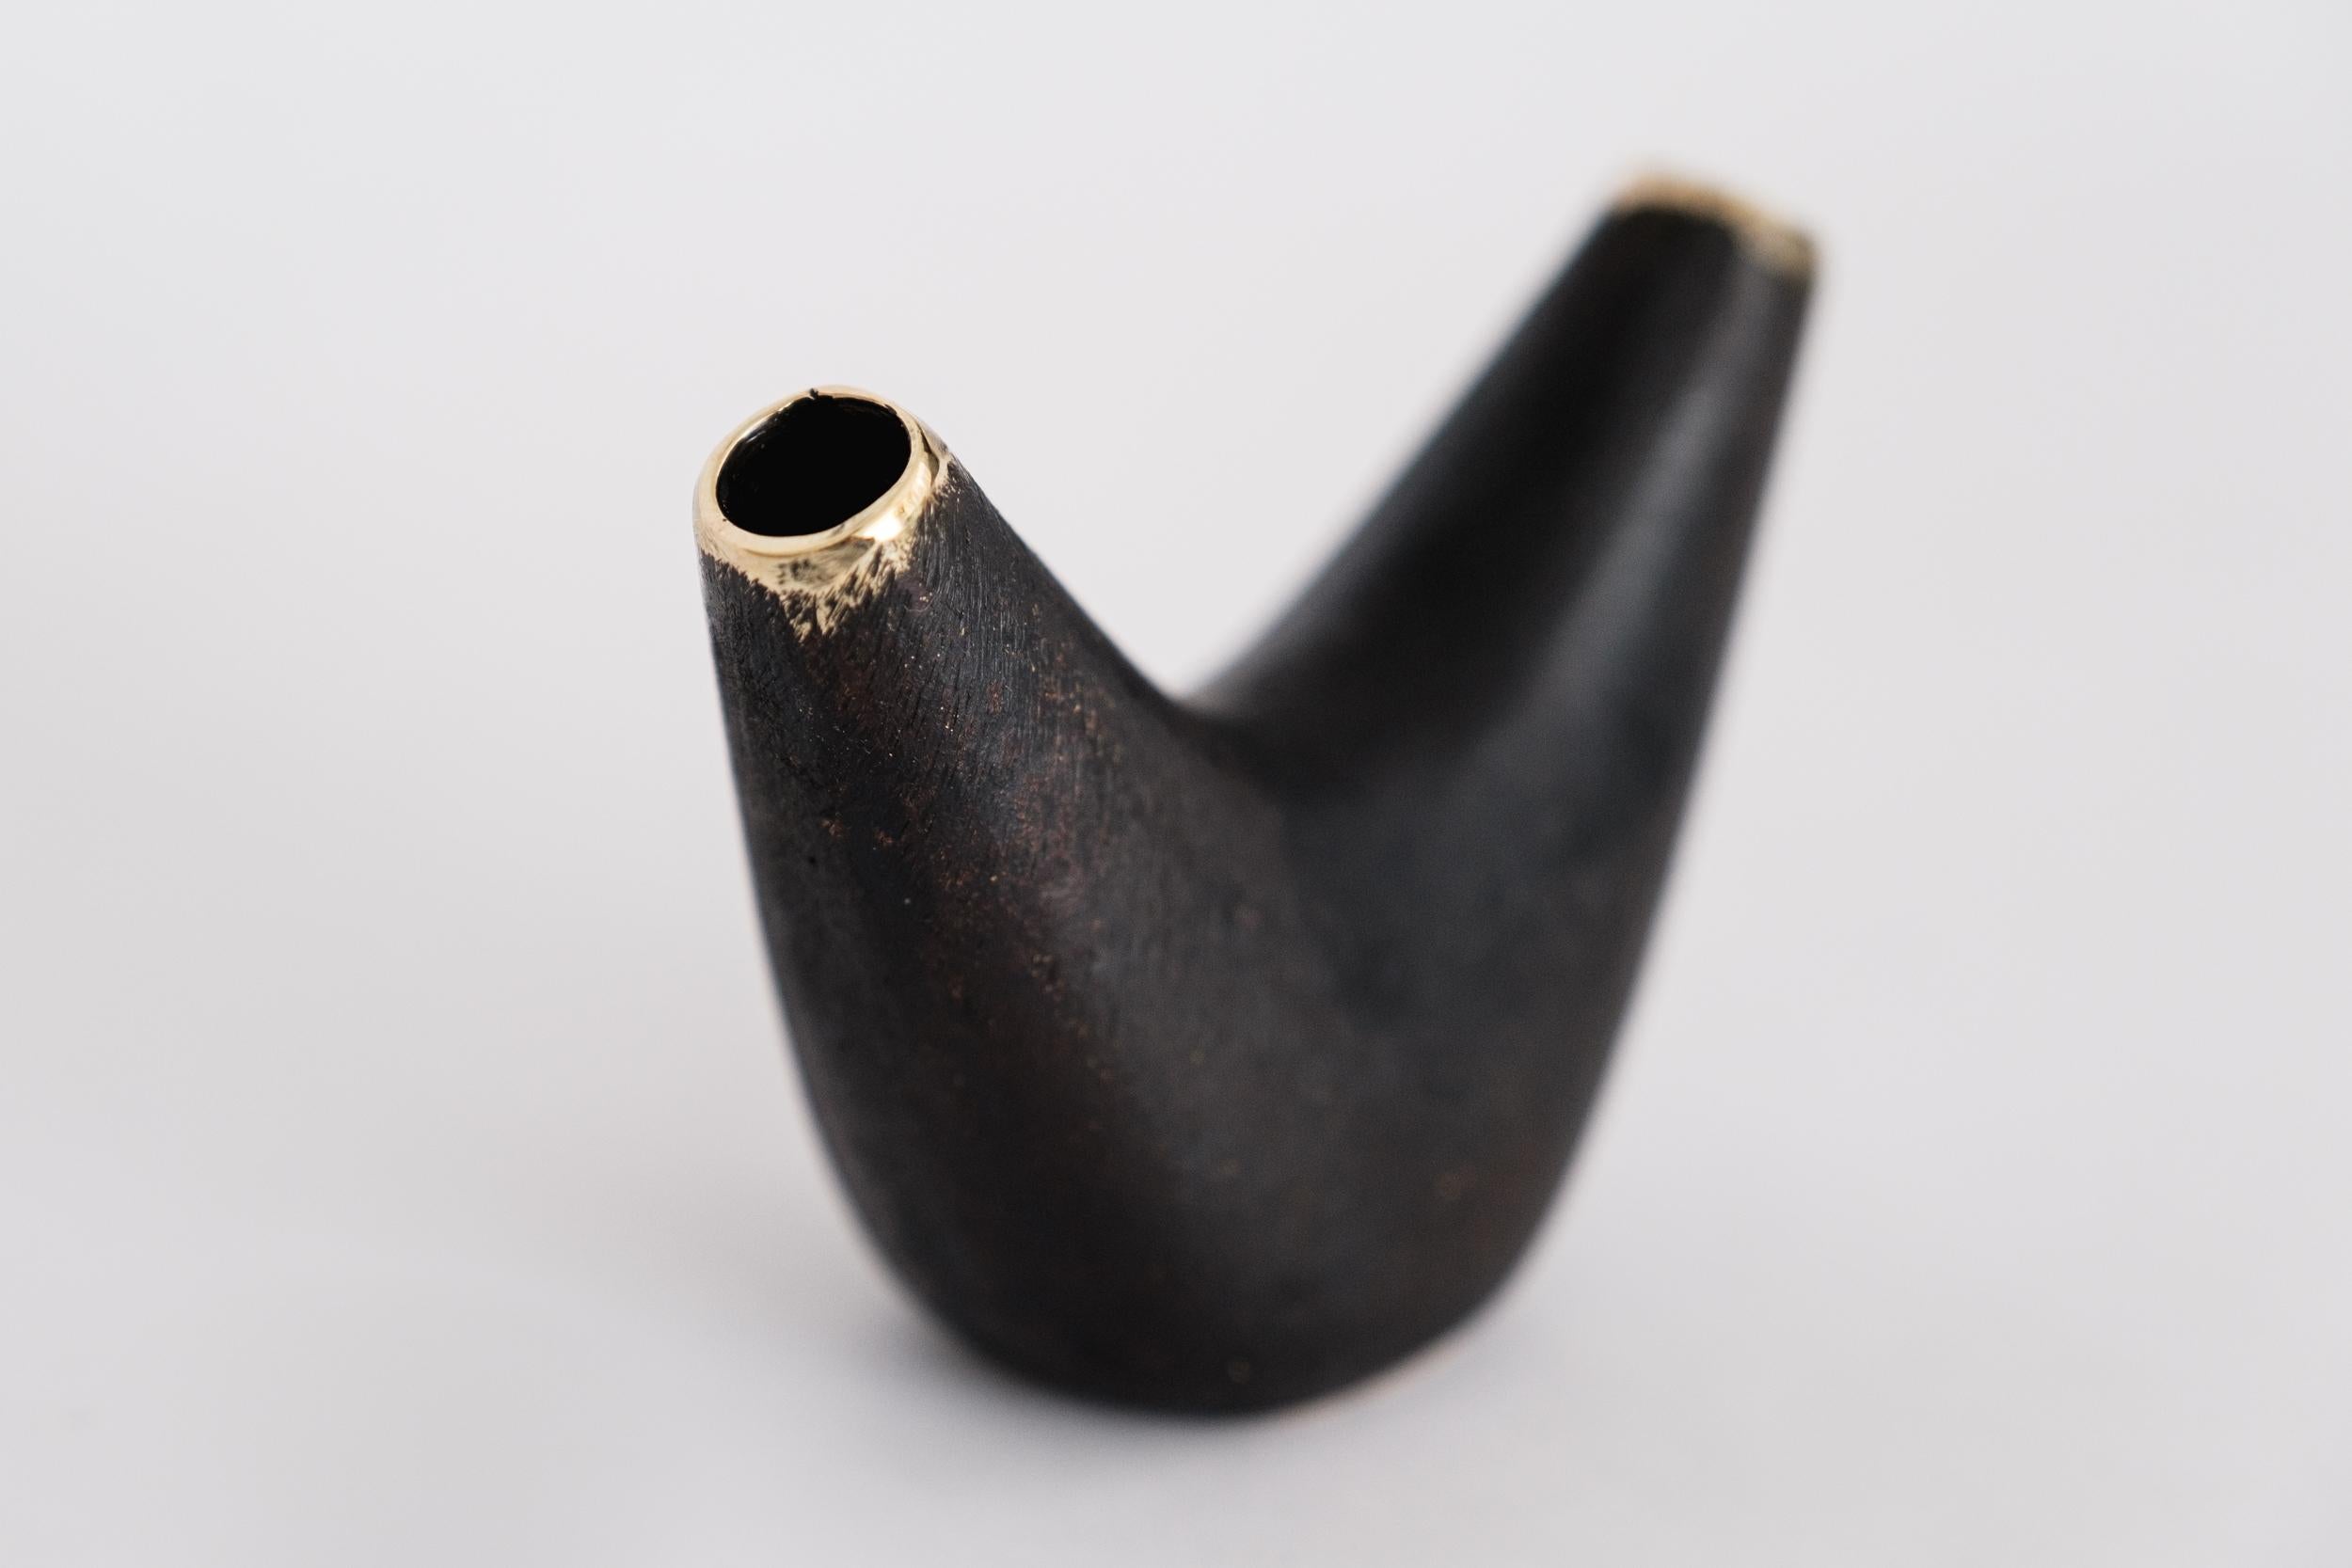 Carl Aubo¨ck Model #3795 'Aorta Crescent' brass vase. Designed in the 1950s, this incredibly refined and sculptural Viennese vase is executed in polished and darkly patinated brass by Werkstätte Carl Auböck, Austria. 

Produced by Carl Auböck IV in